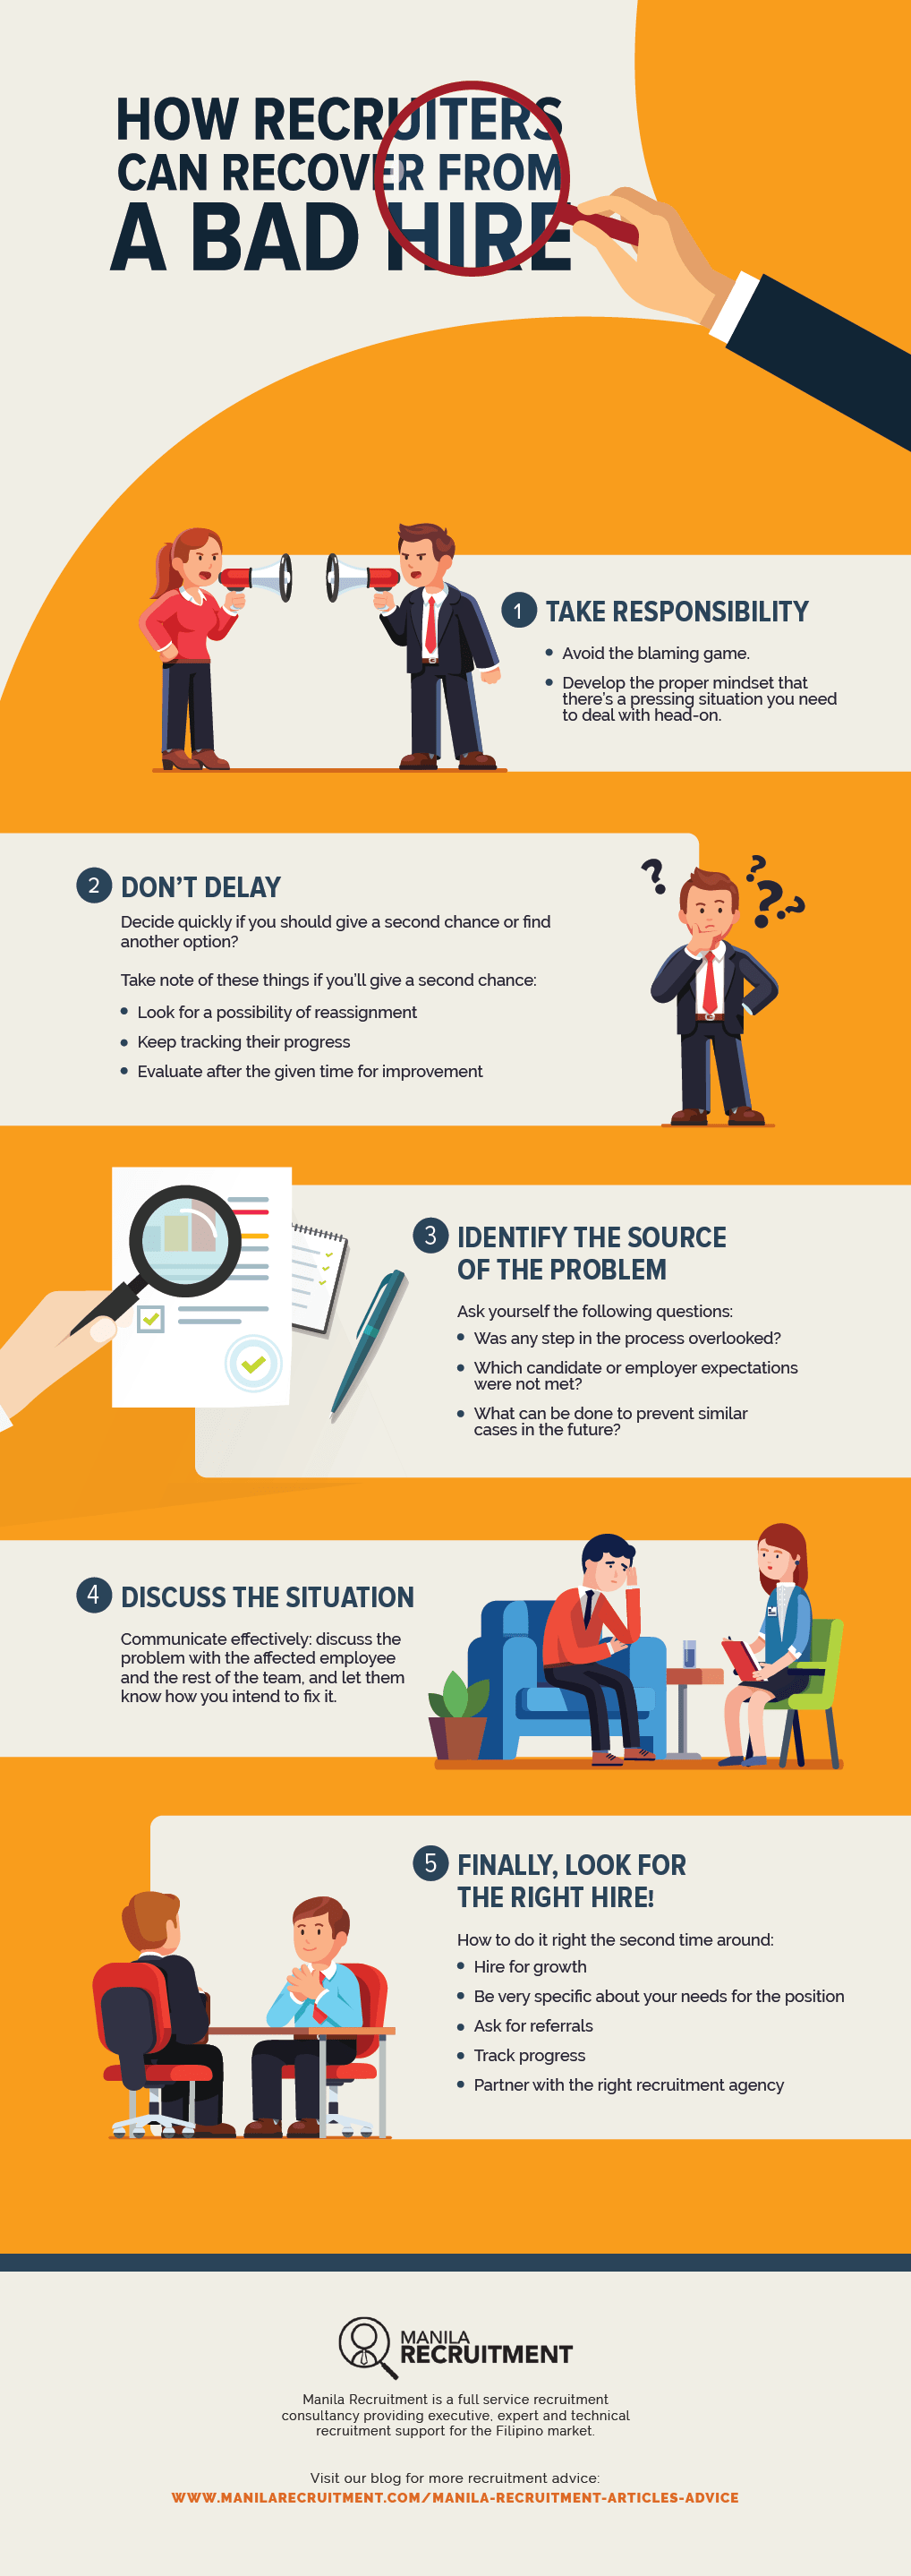 Recruiting a Bad Hire infographic